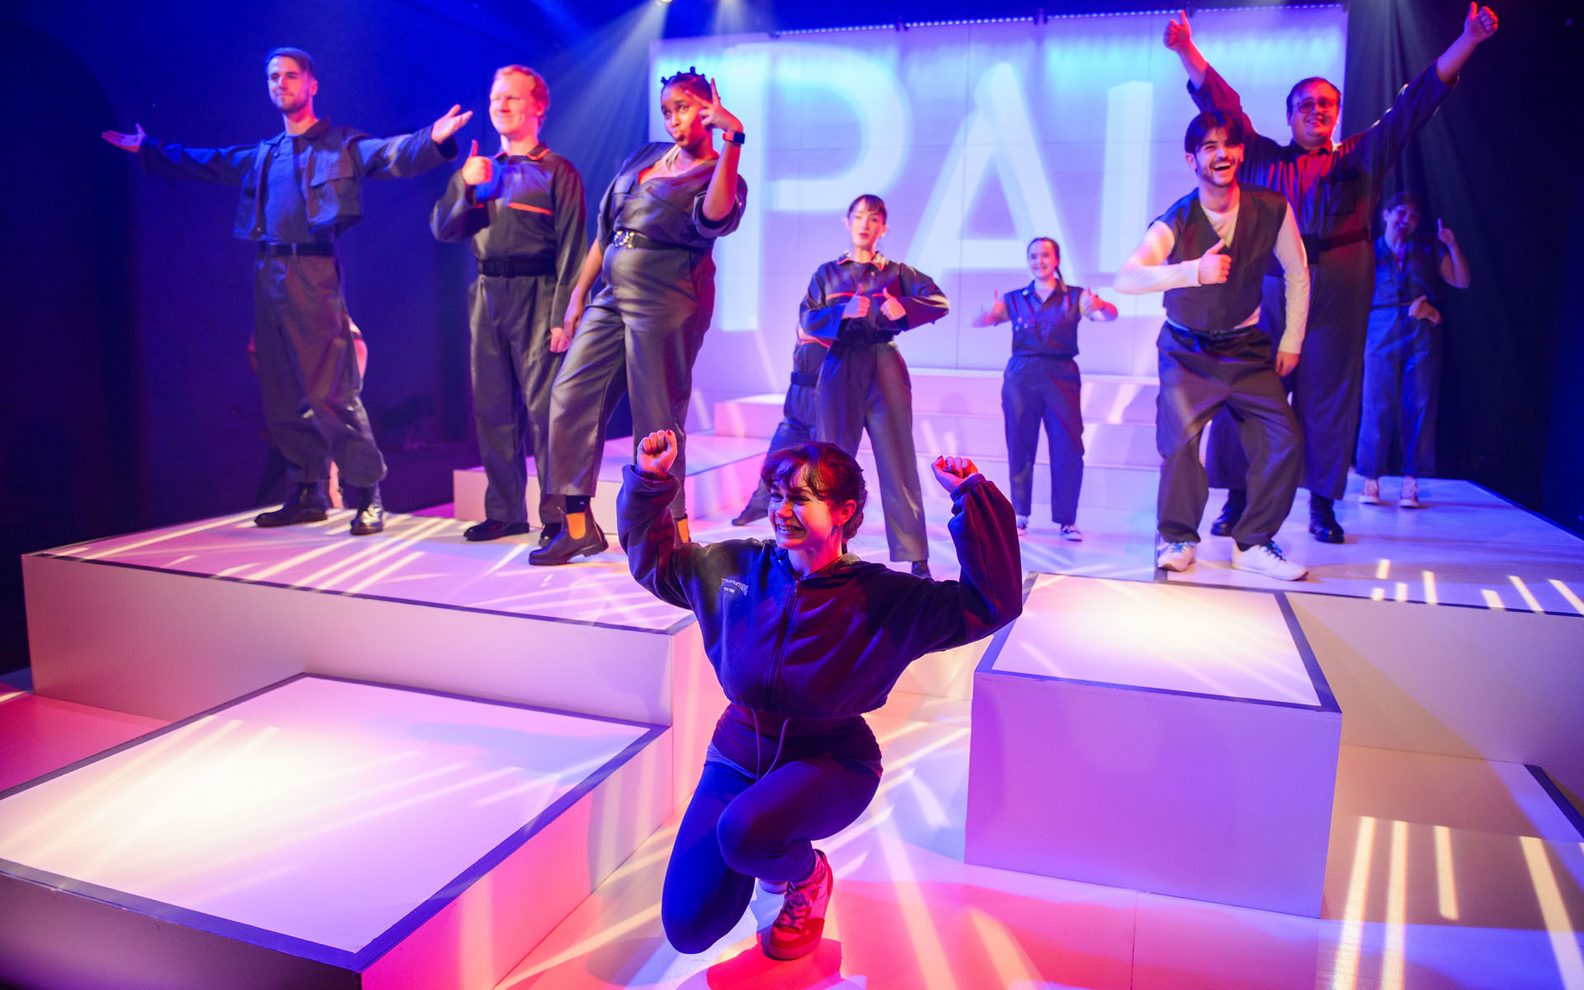 A group of 9 young people are standing on a futuristic stage. They are all wearing grey boiler suits. They are standing in a variety of poses. Some are standing with their thumbs up, other have their arms stretched up, others are crouched down and smiling.